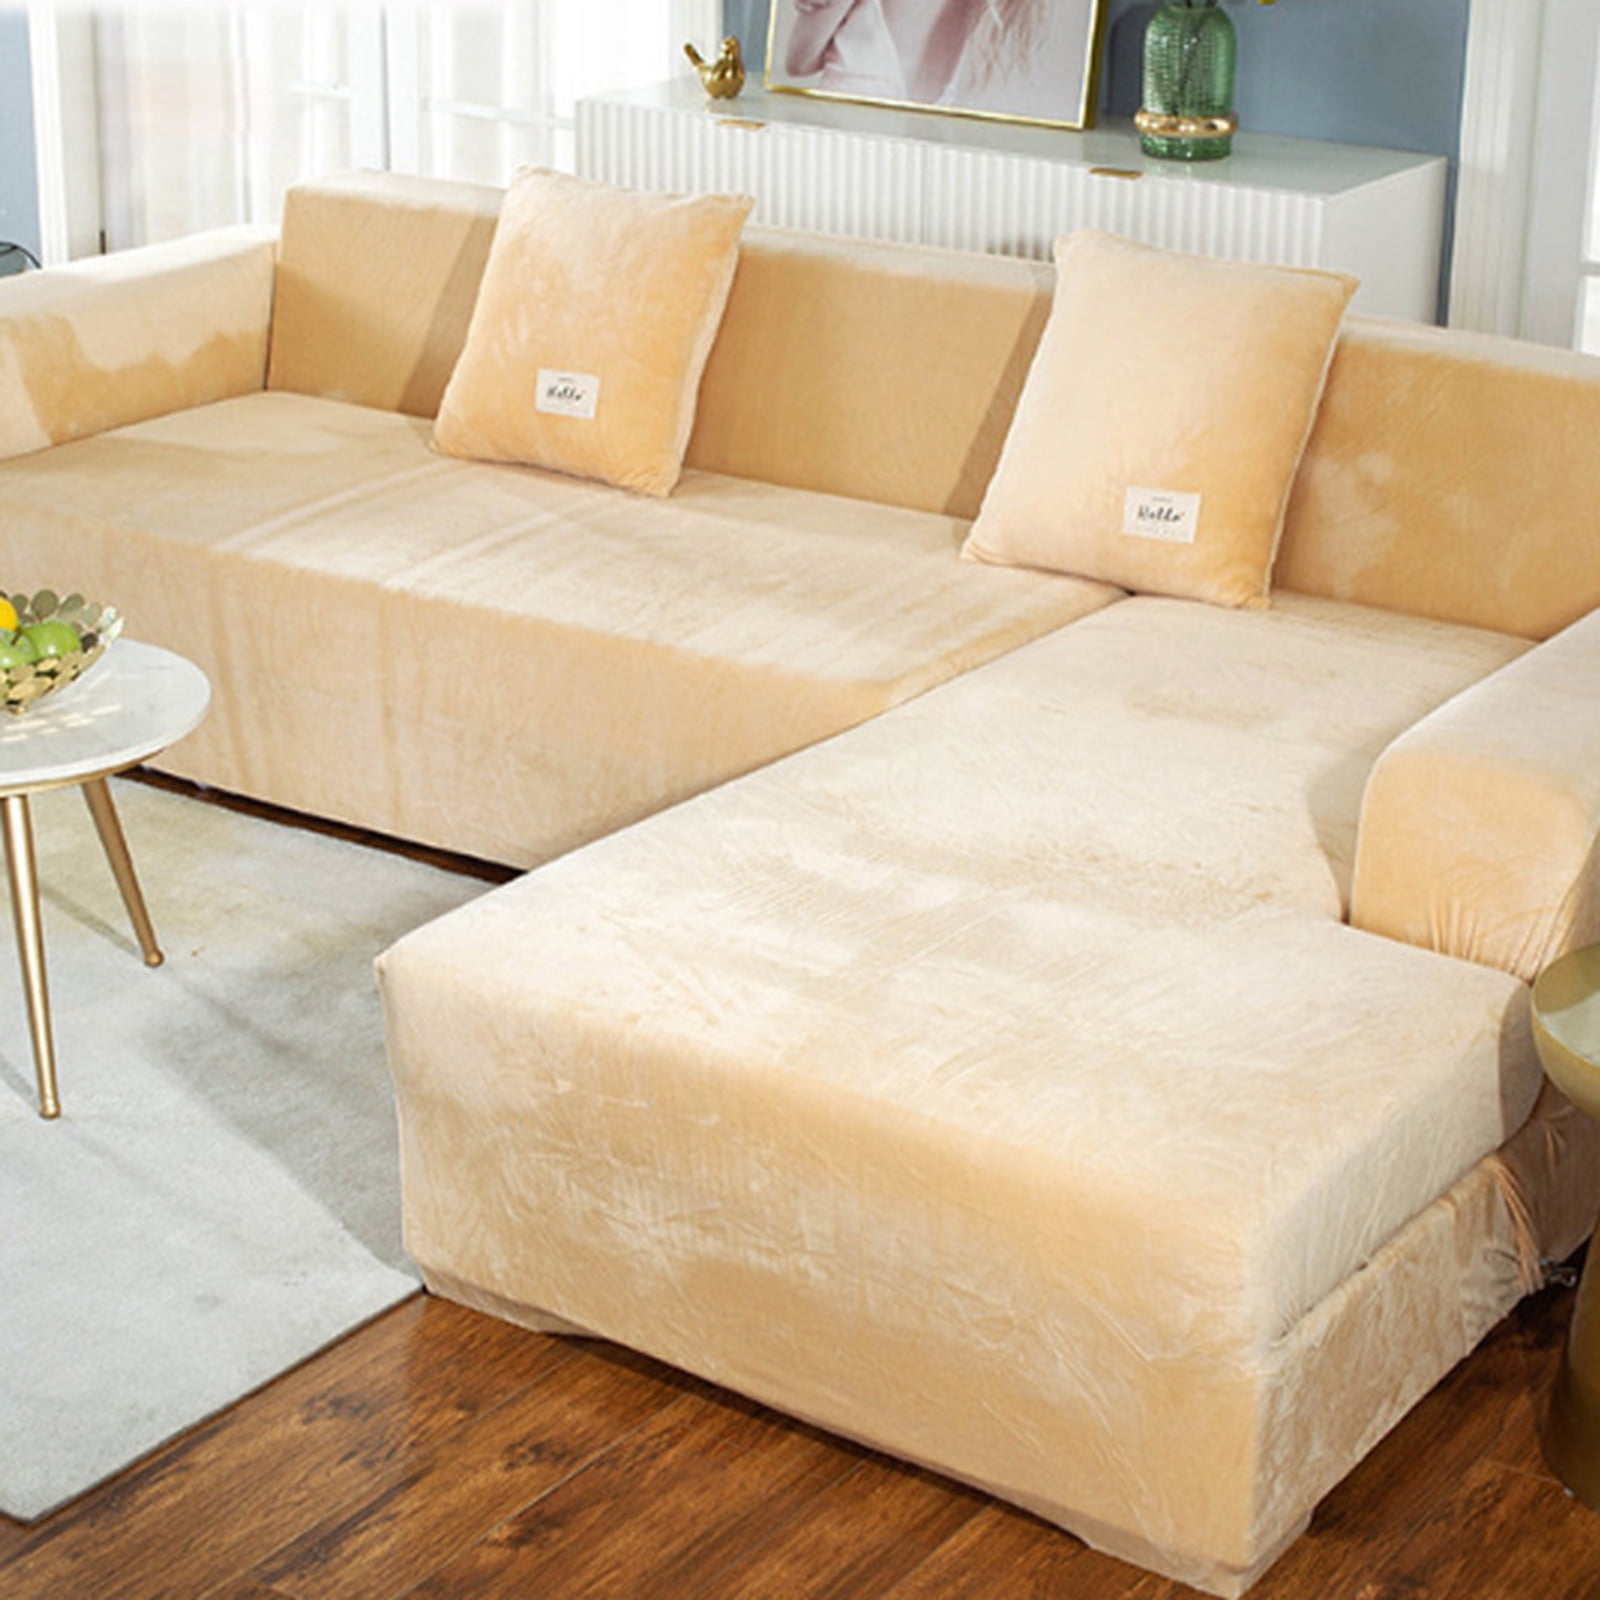 Details about   Warm Plush Sofa Cover Sectional Corner Couch Covers Home Decor 1/2/3/4 Seats 